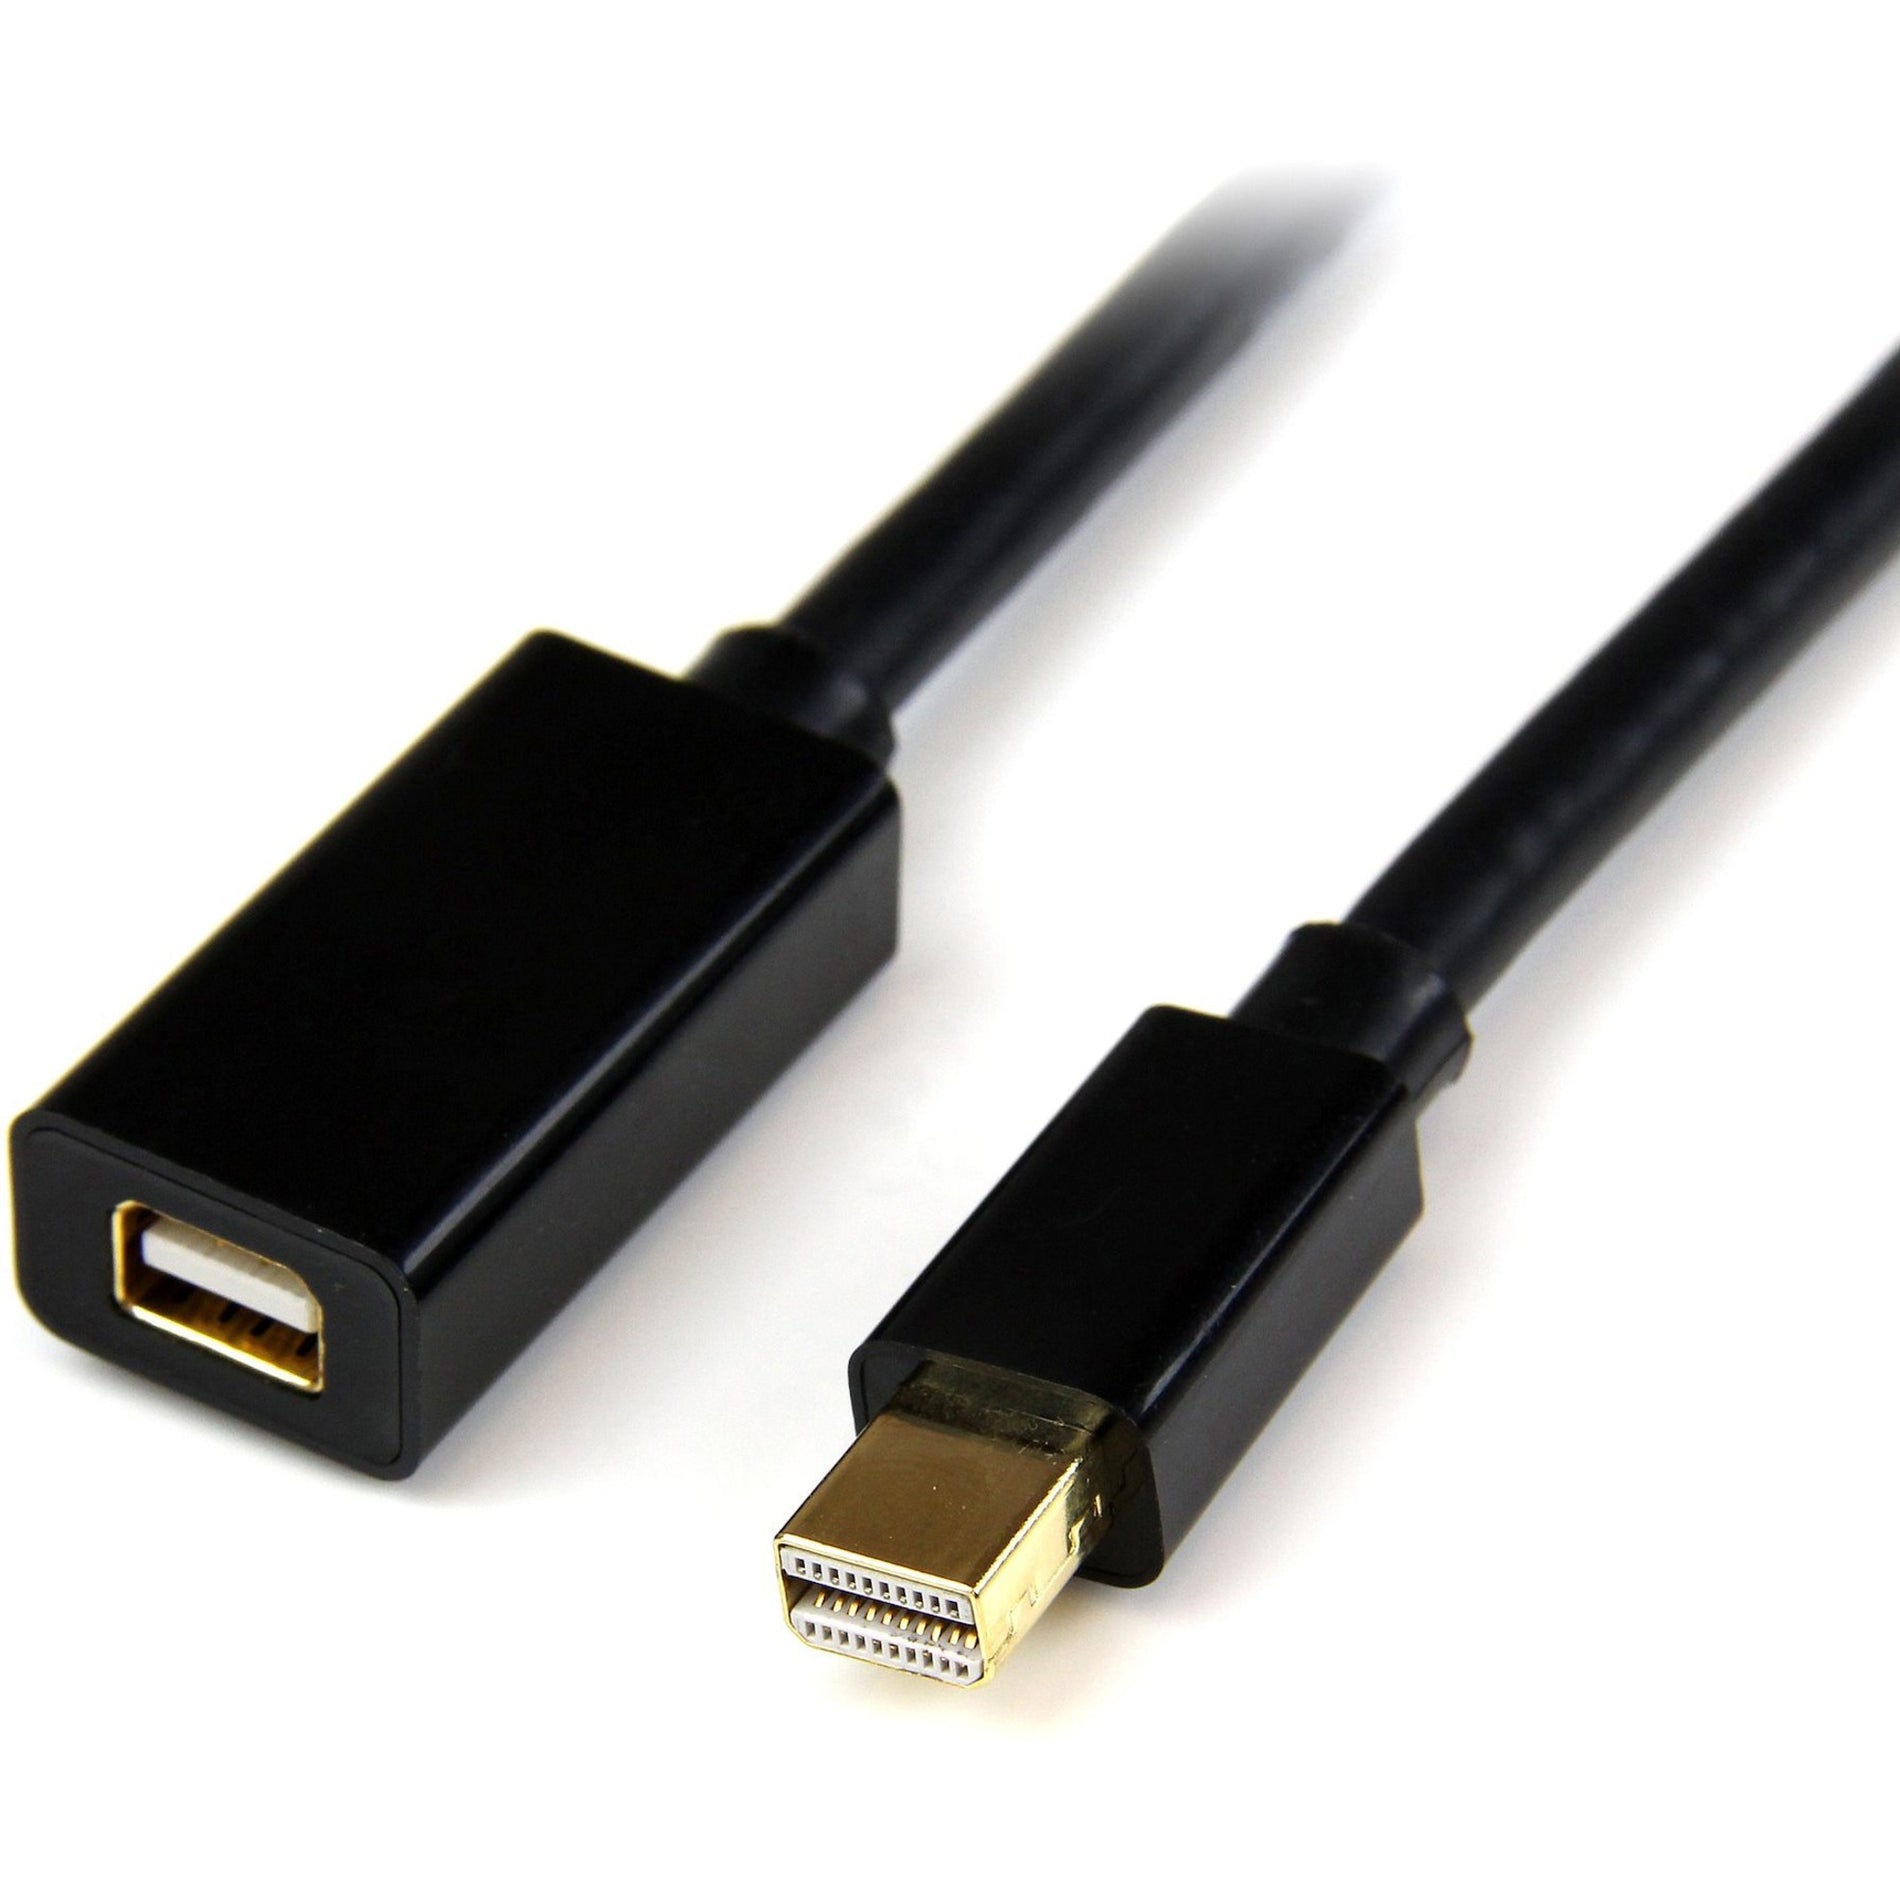 StarTech.com MDPEXT3 3 ft Mini DisplayPort 1.2 Video Extension Cable M/F, 4k Display, Gold Plated Connectors [Discontinued]